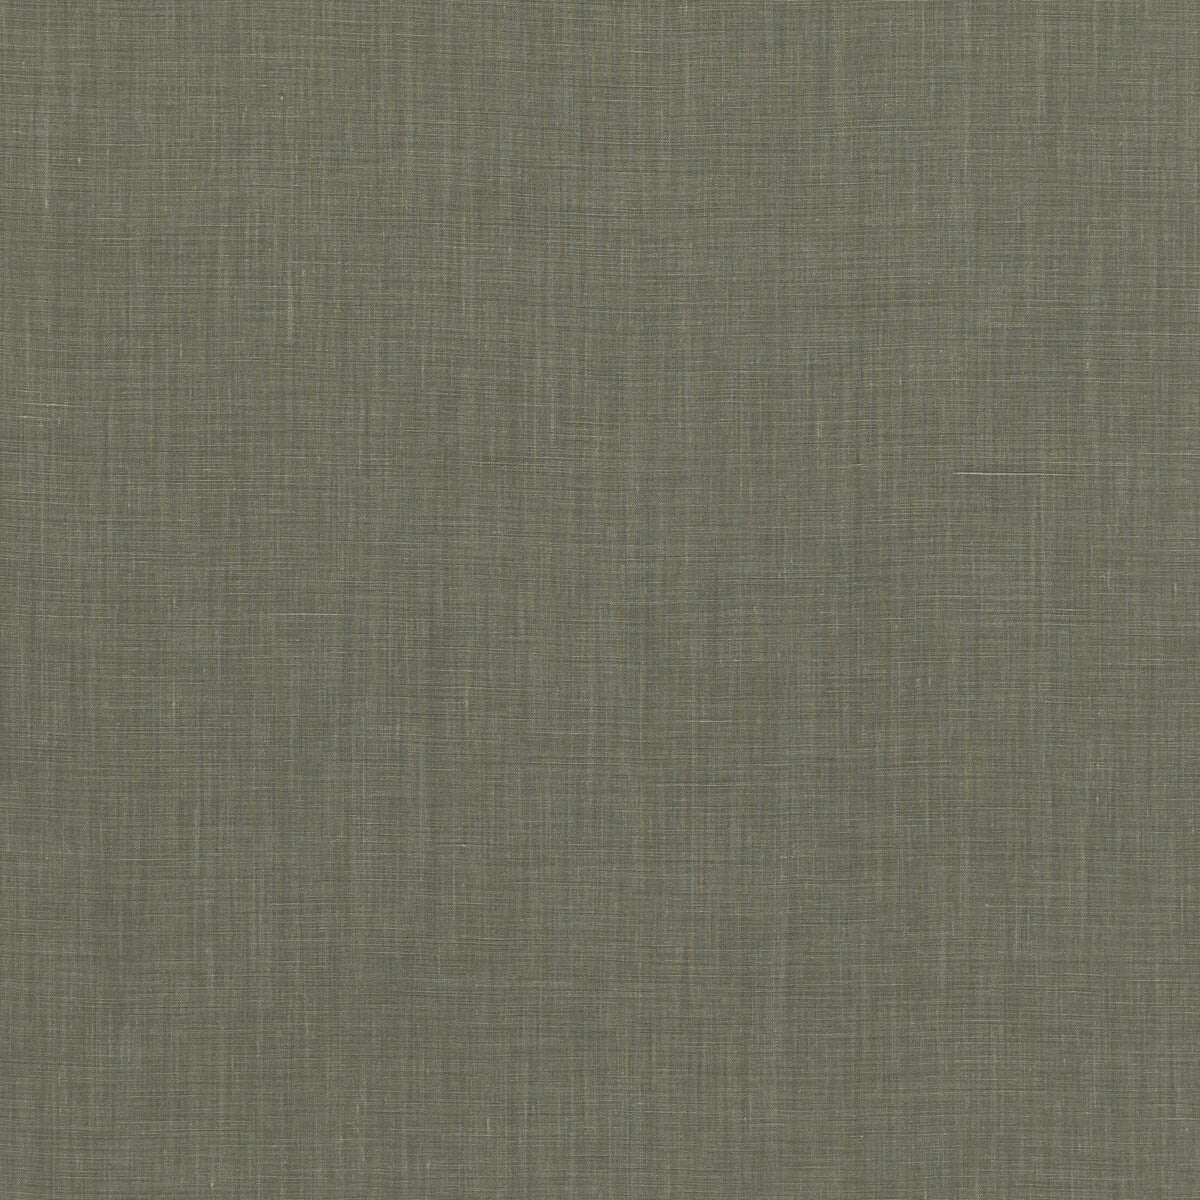 Baker House Linen fabric in sage color - pattern BF10961.790.0 - by G P &amp; J Baker in the Baker House Linens collection